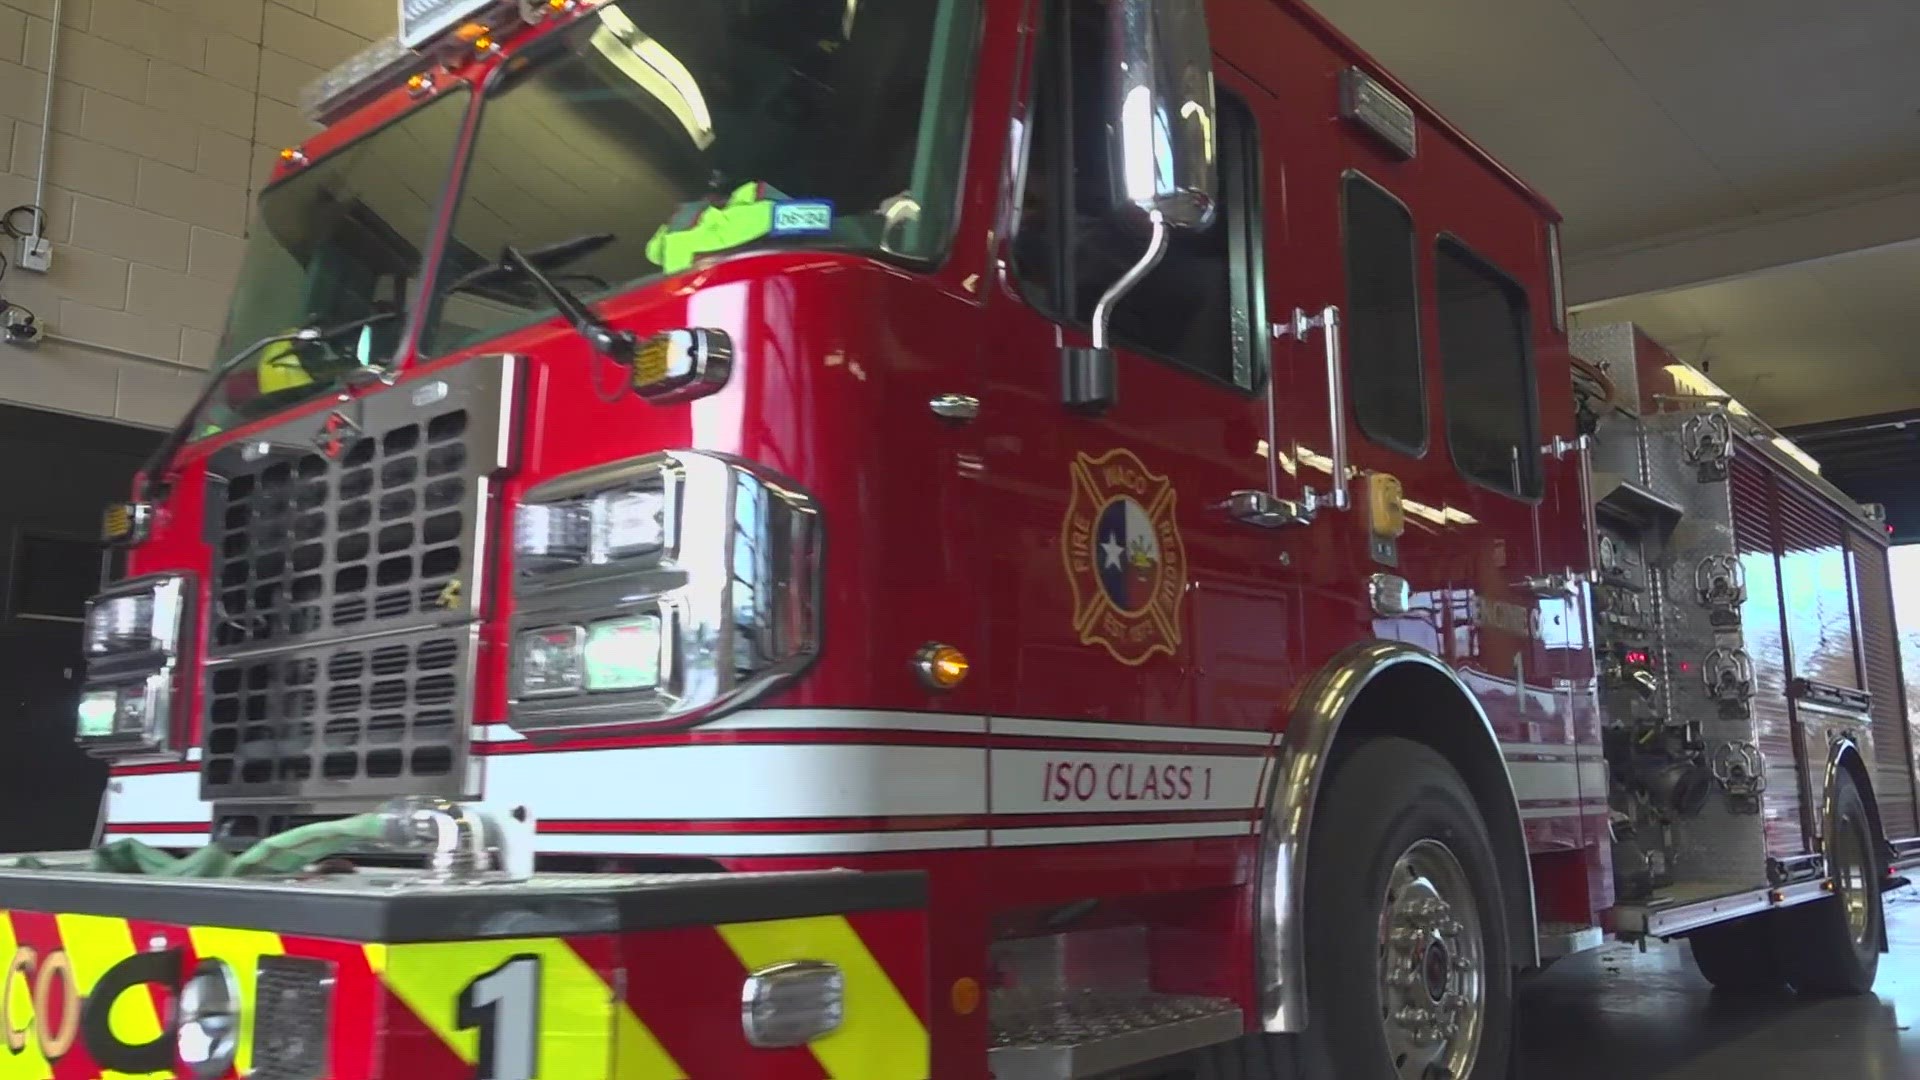 Response time is so important in an emergency, and the fire department hopes this new tech will help that.